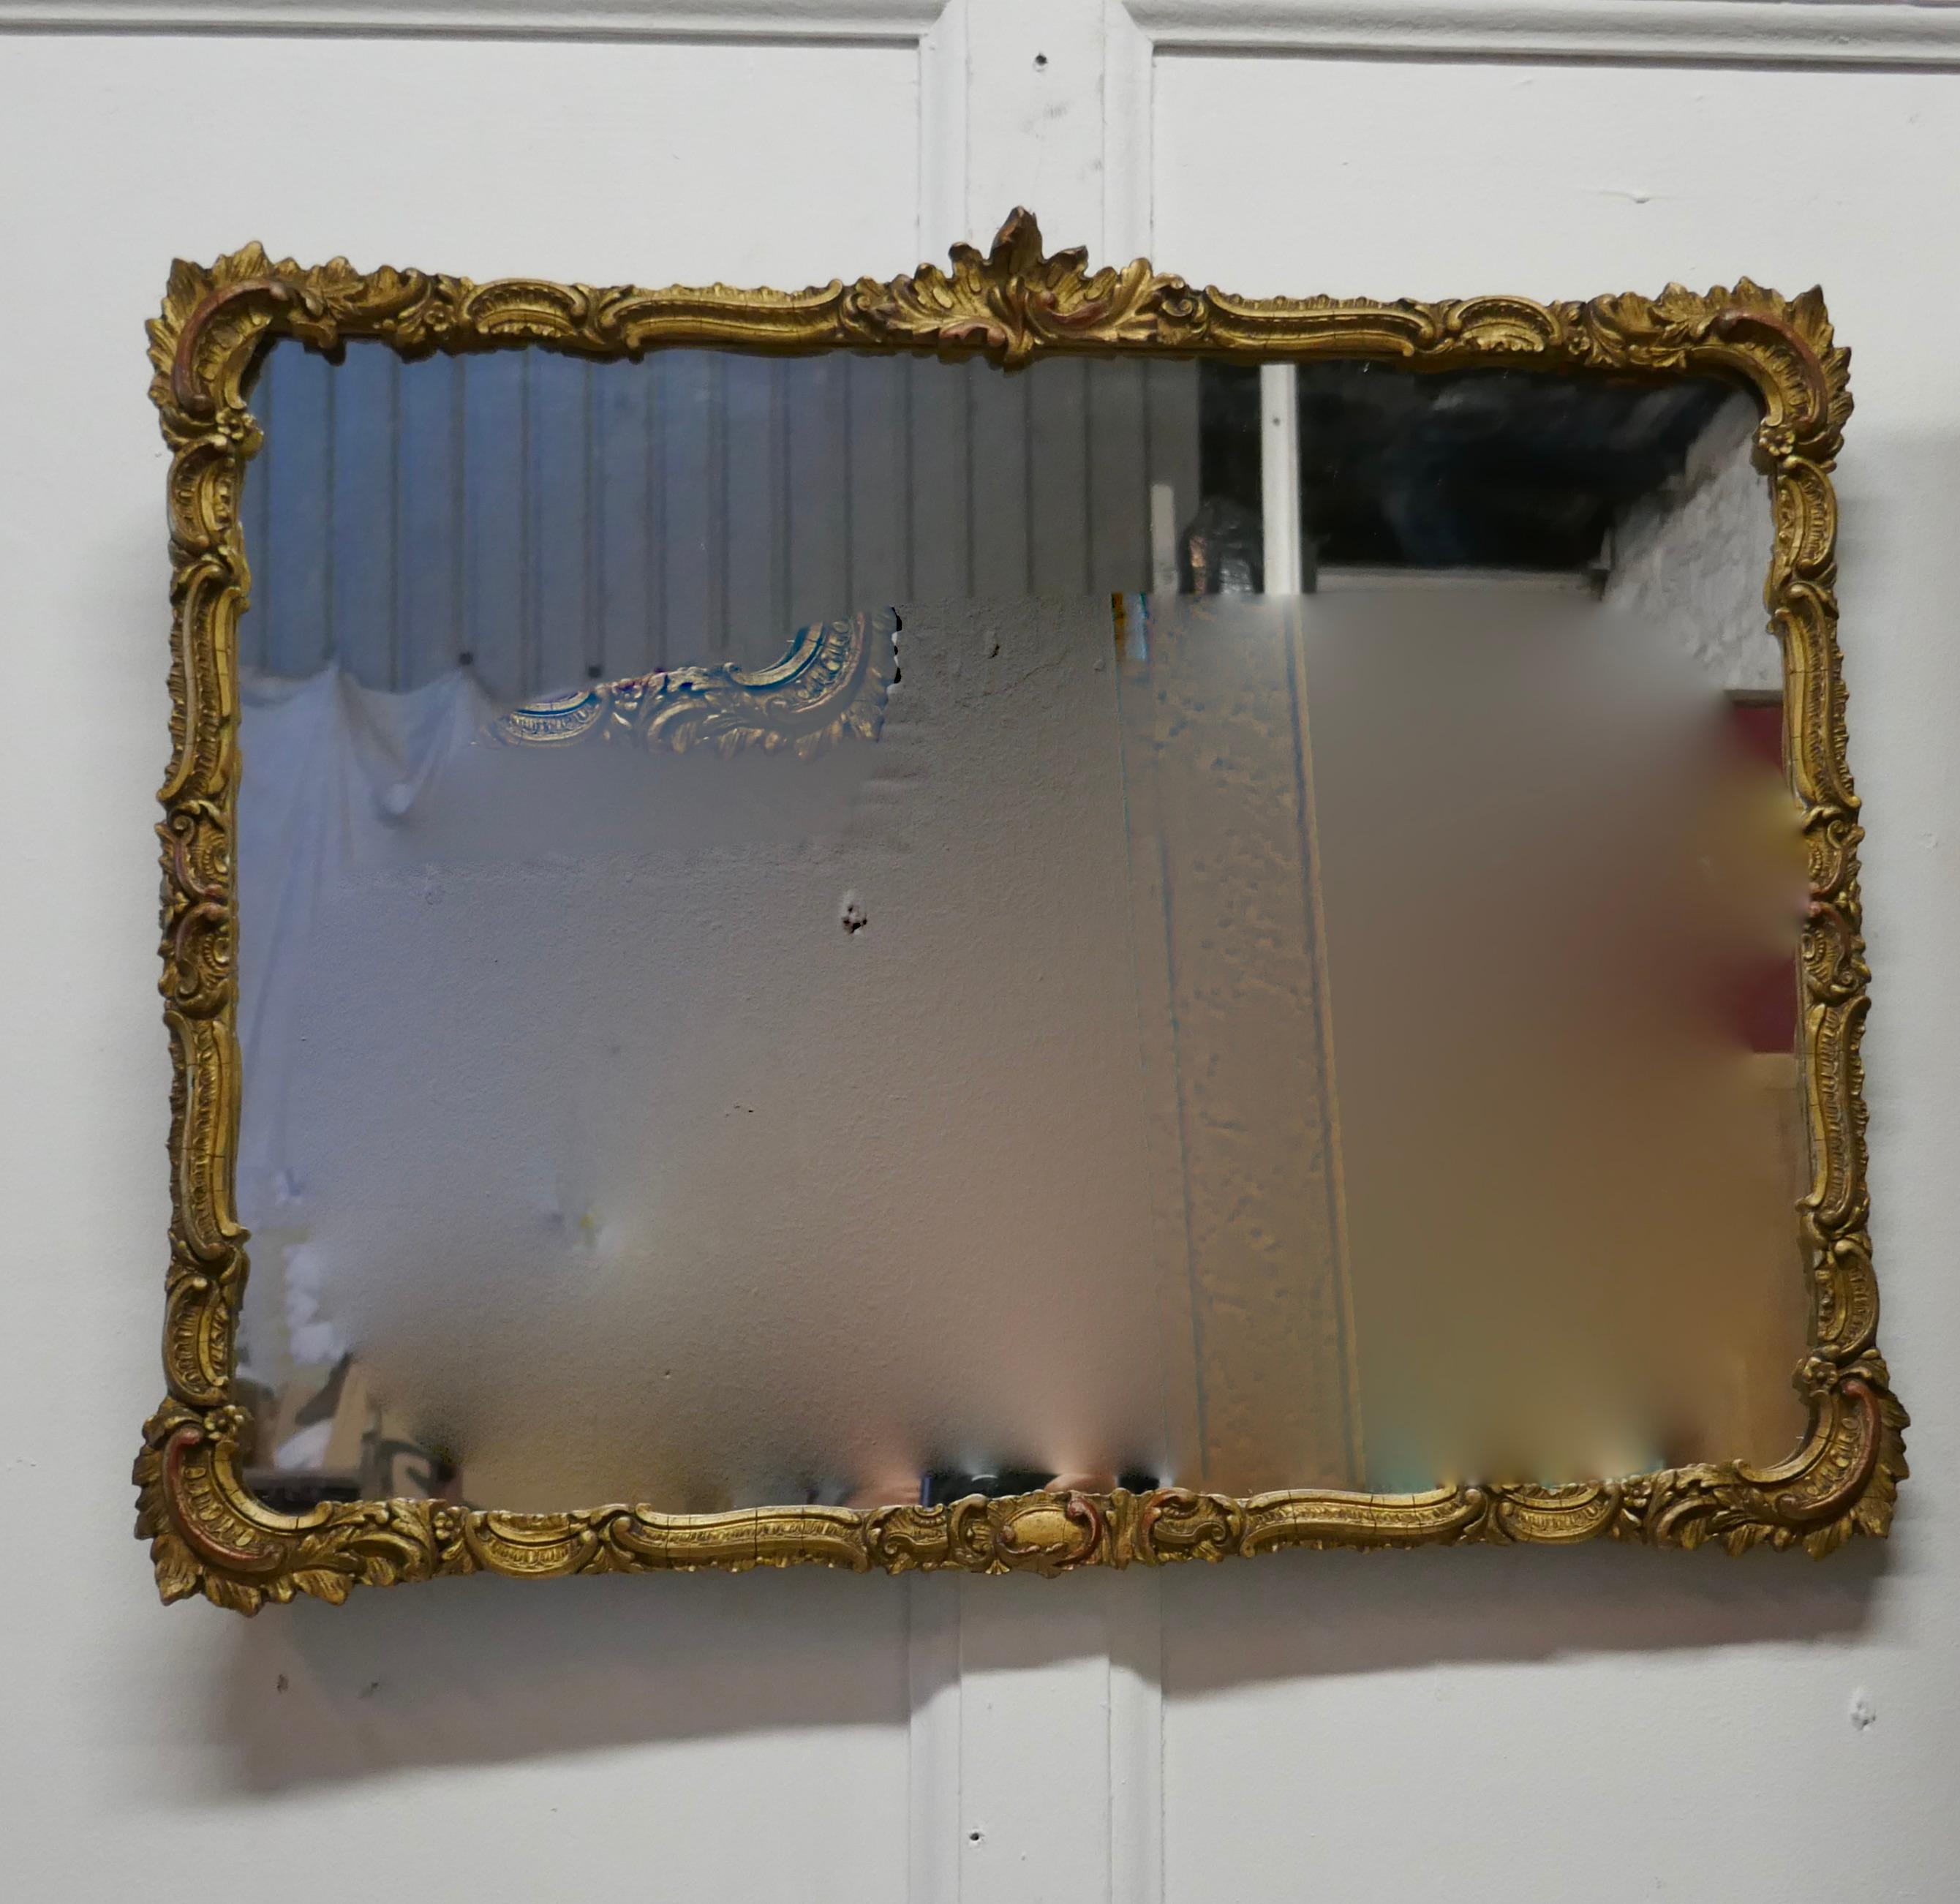 A Regency style gilt wall mirror

The rose gilt frame has a Rococo shell decoration all the way around the rectangular frame
The mirror is in good condition there are very minor cracks in the gesso but is all stabile
The mirror is 18” high and